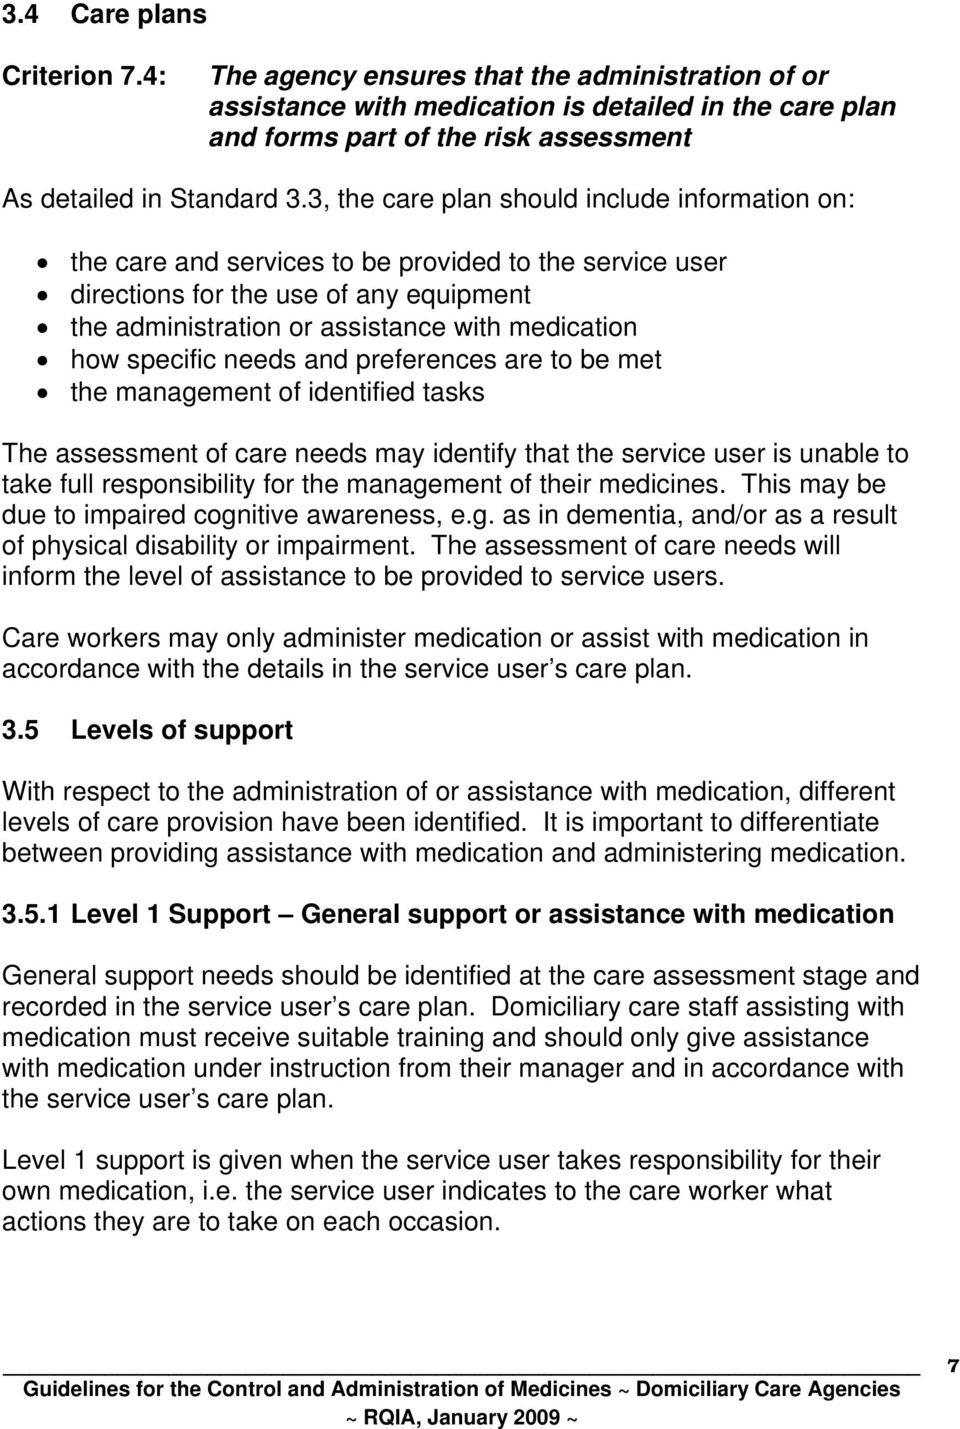 specific needs and preferences are to be met the management of identified tasks The assessment of care needs may identify that the service user is unable to take full responsibility for the